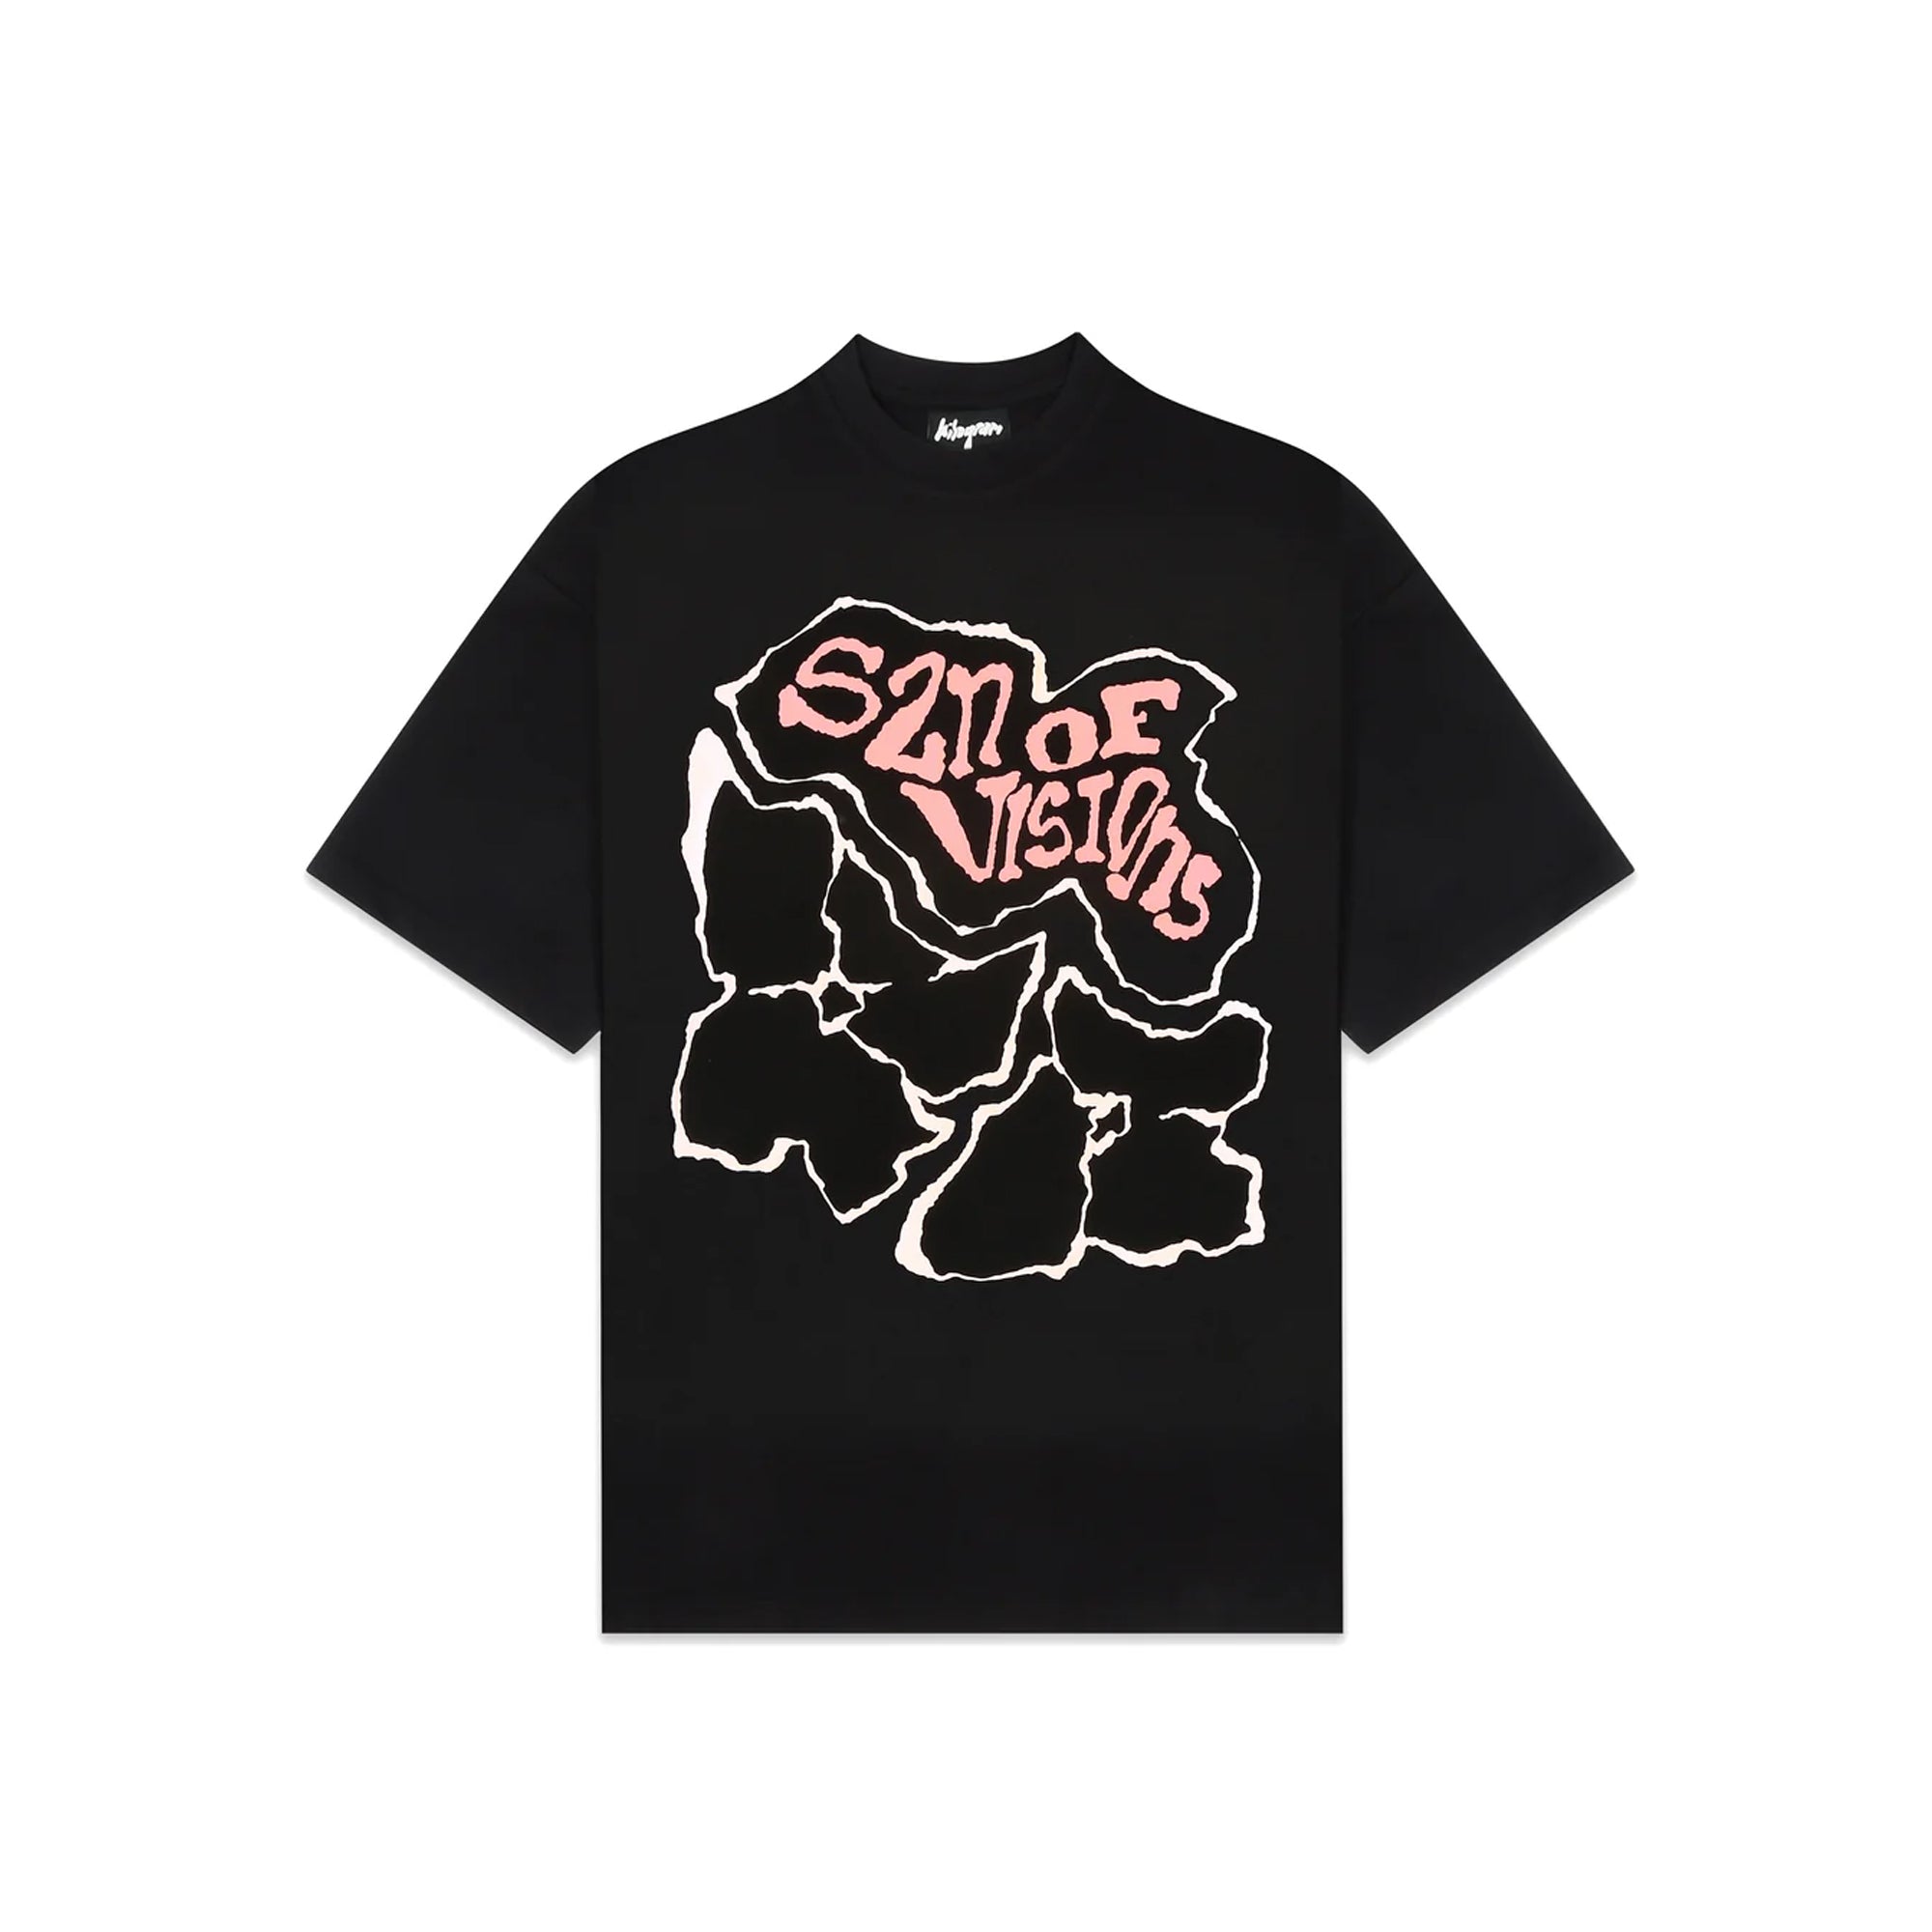 'SZN of Visions' Tee